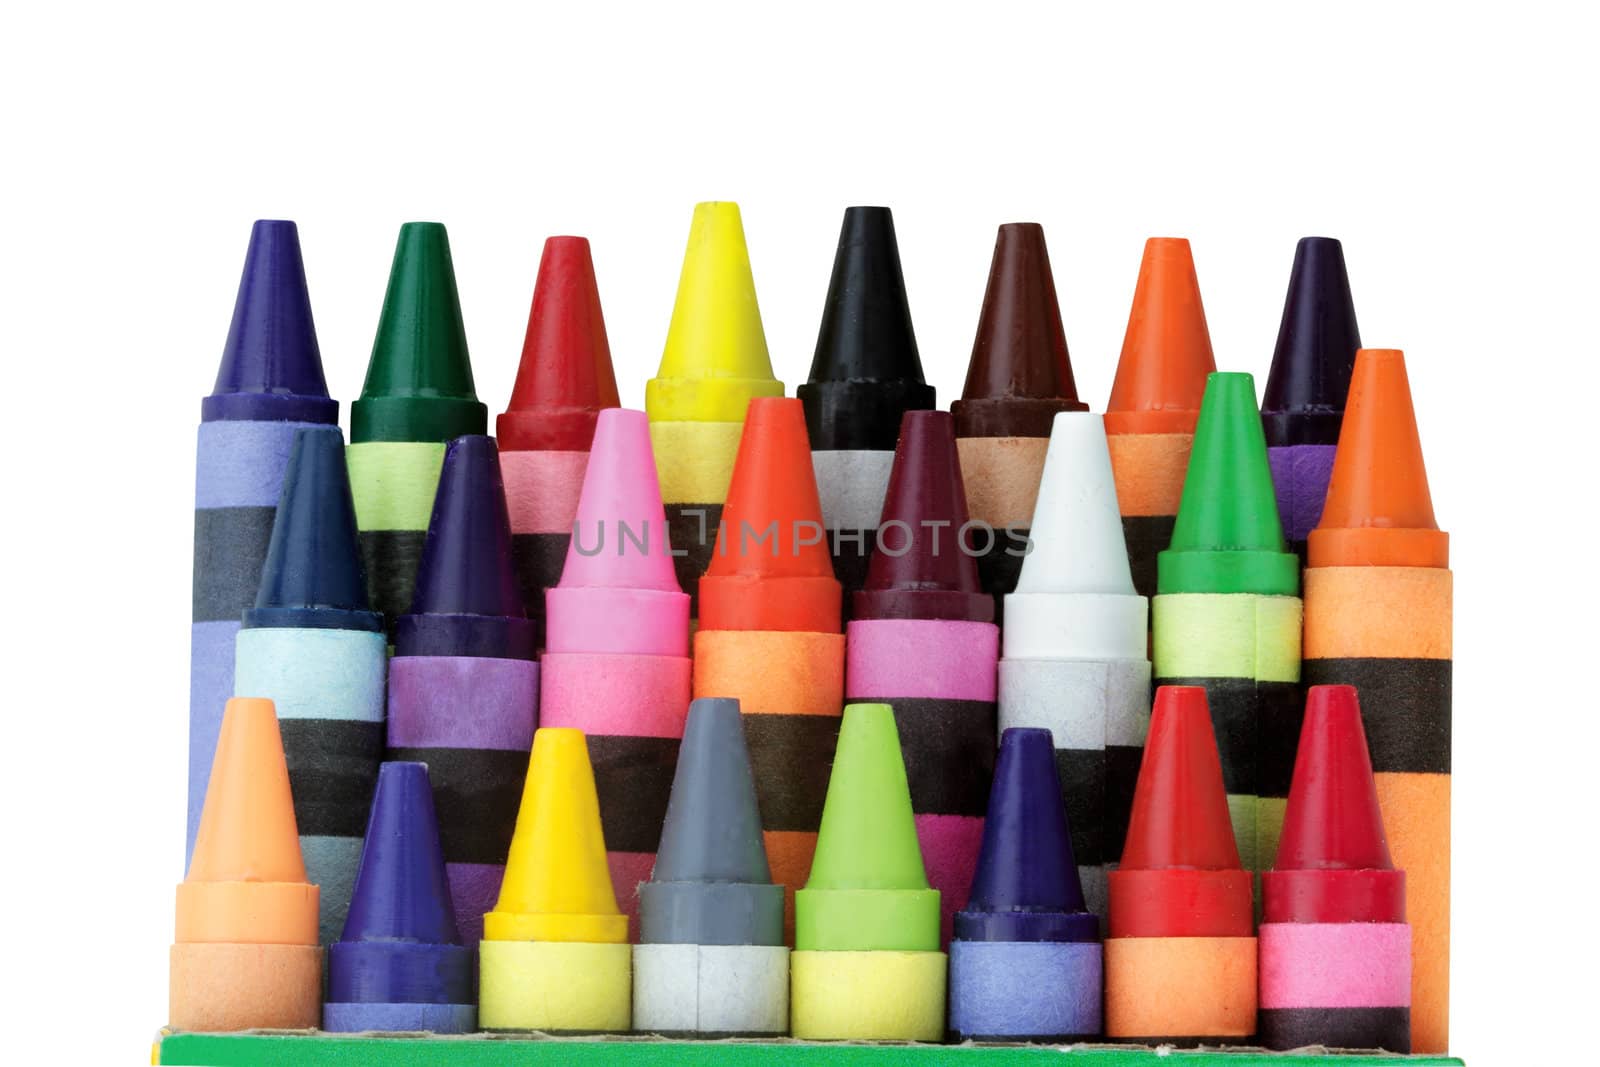 Three rows of wax crayons in a box with clipping path included. Shallow DOF.